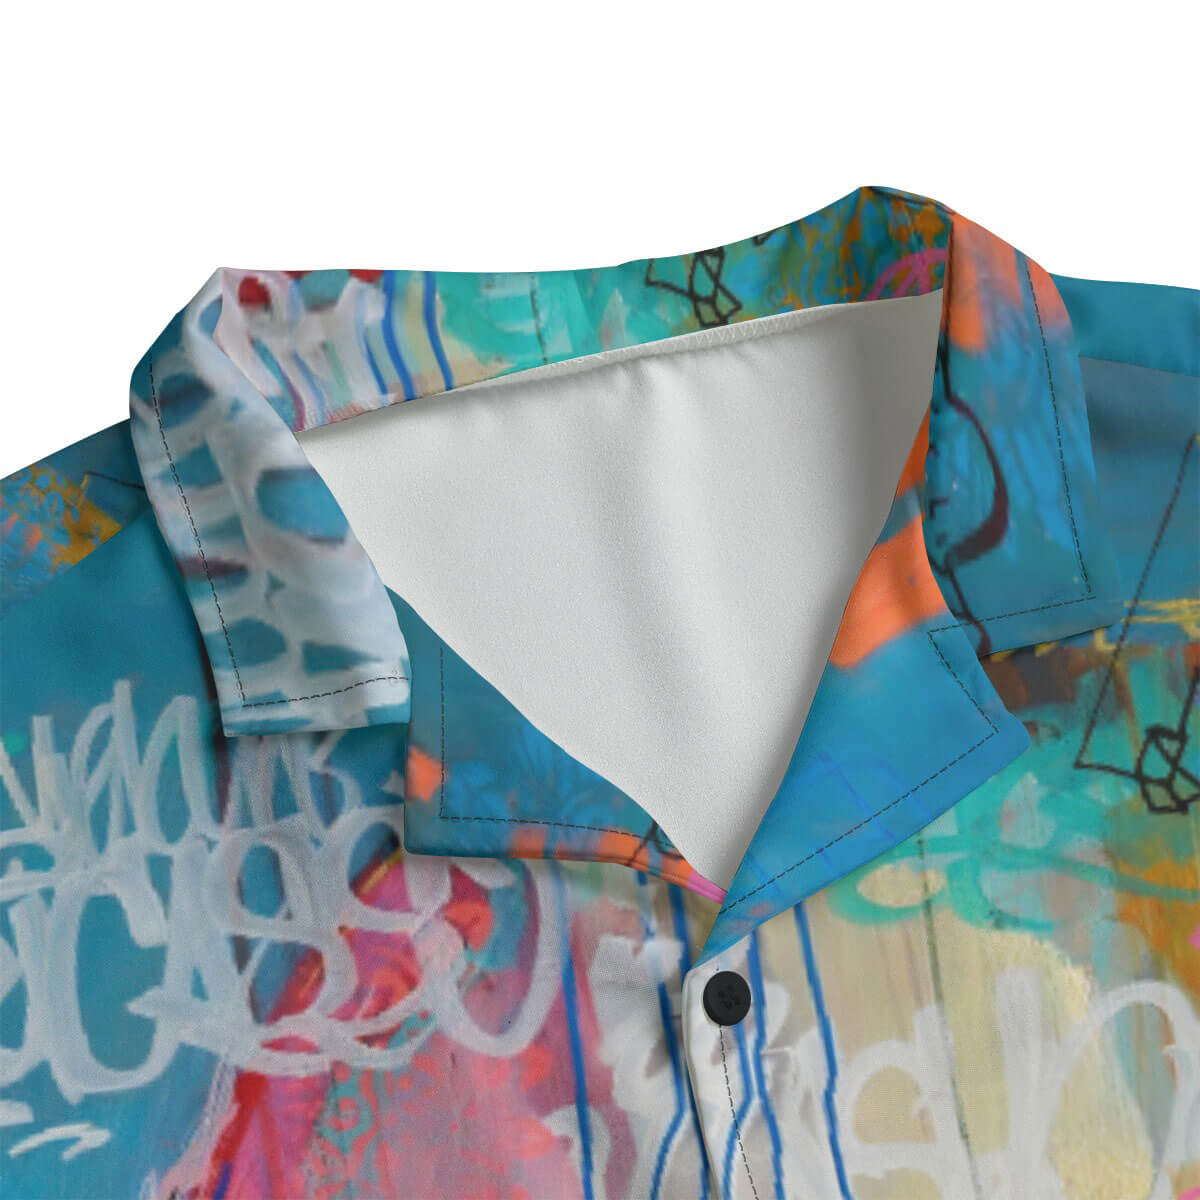 Colorful Cubist art on unique Hawaiian shirt inspired by Picasso